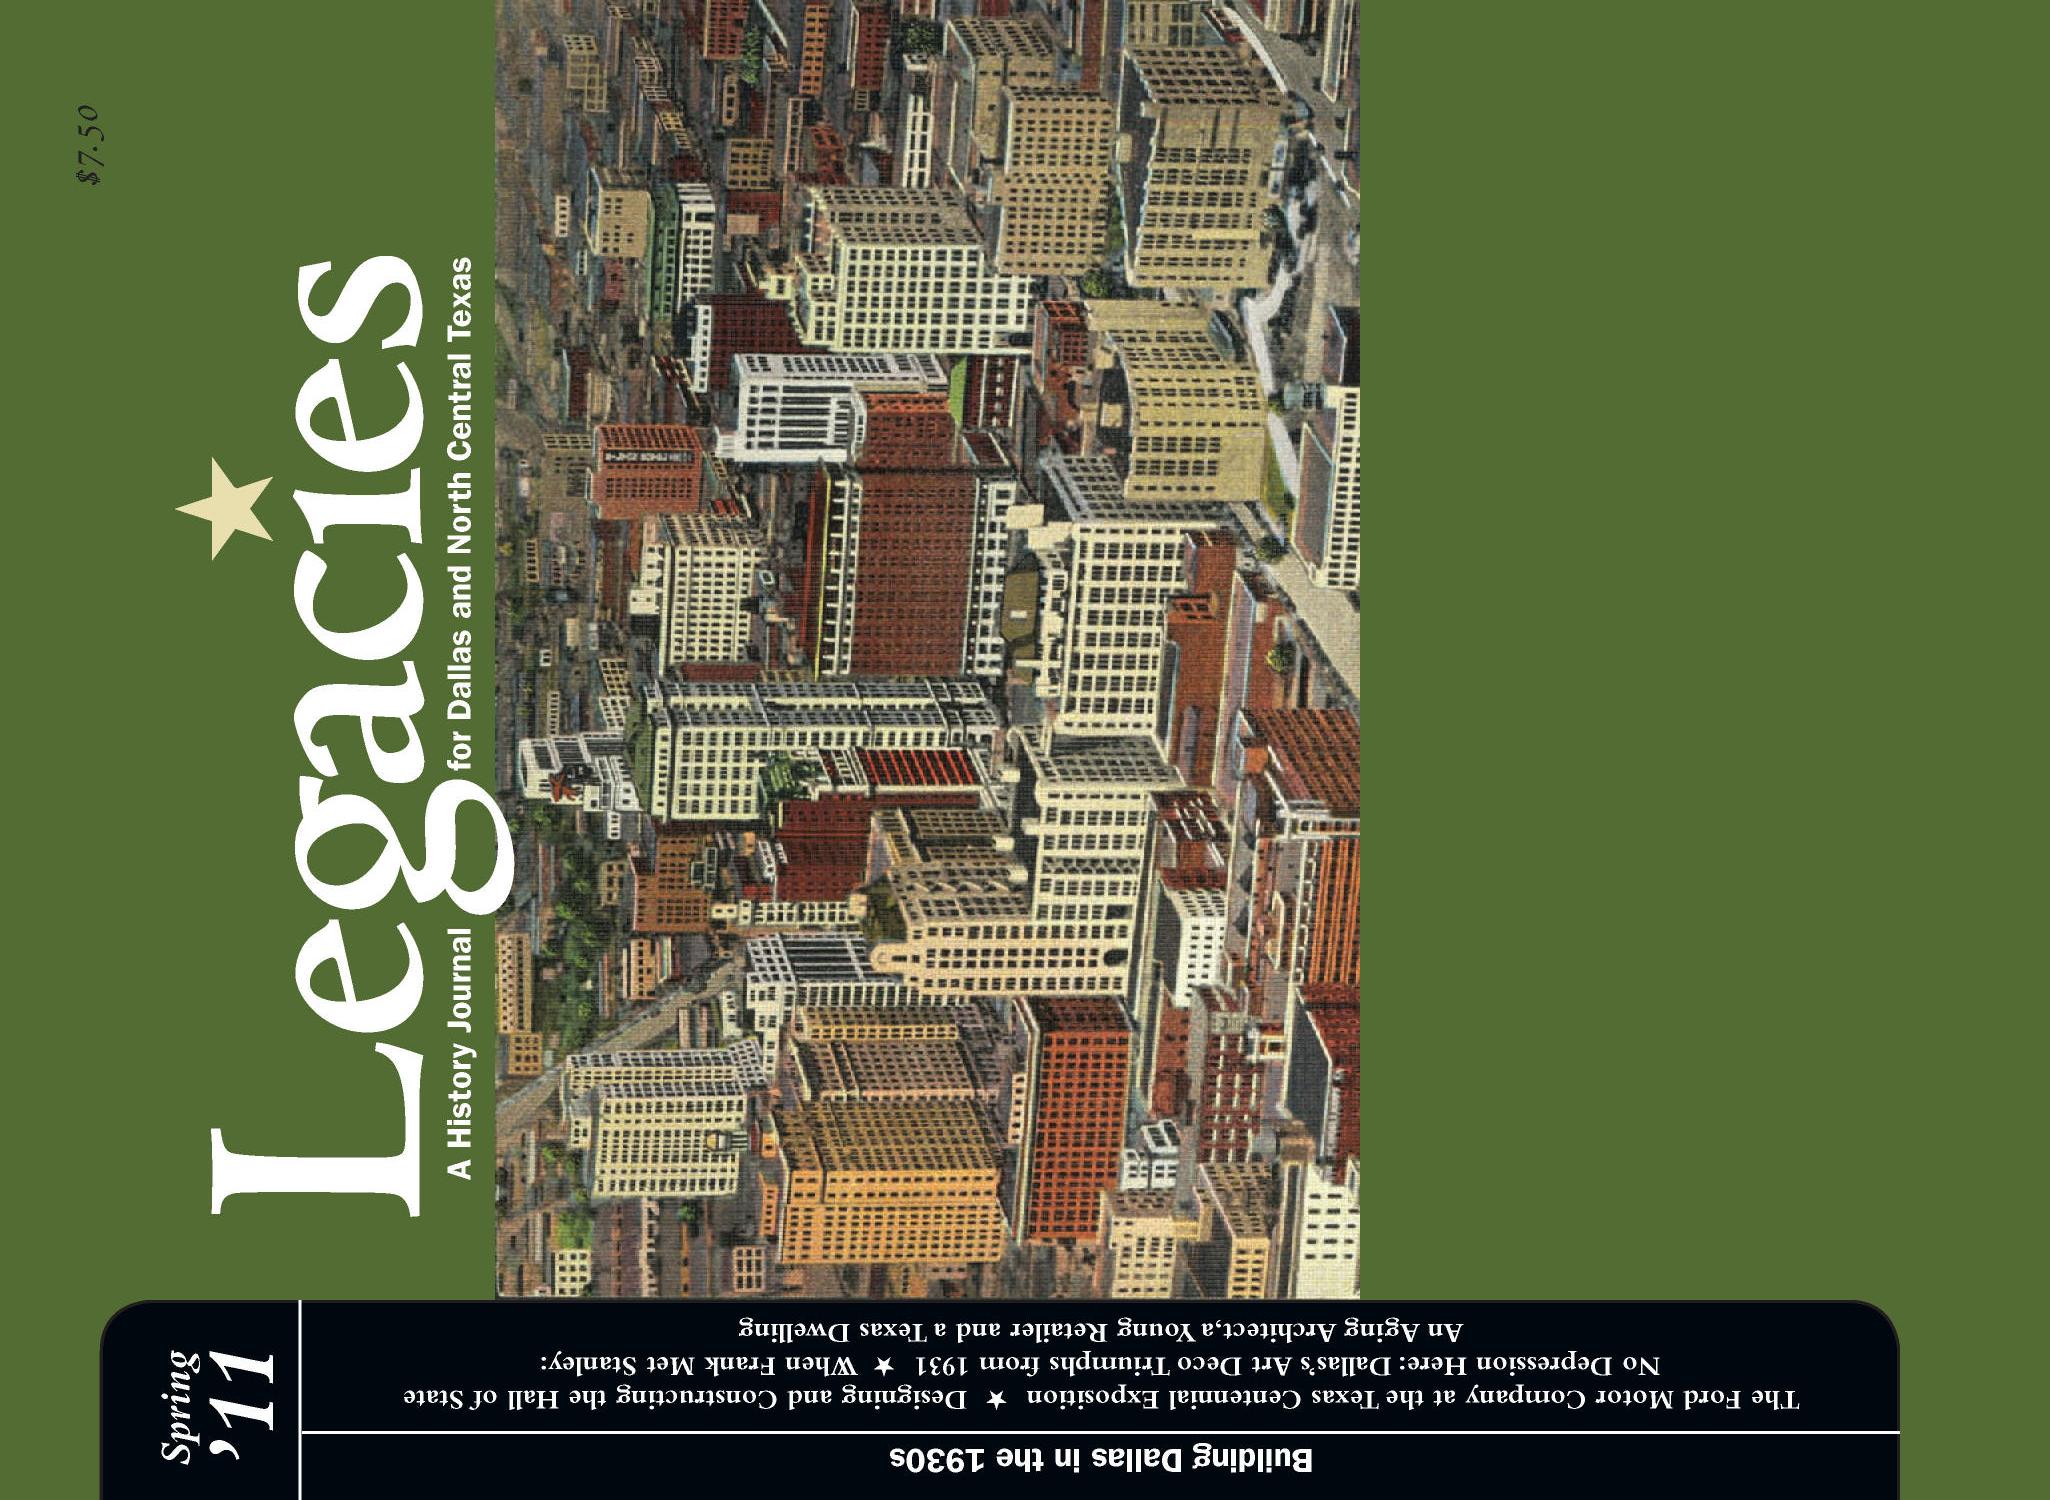 Legacies: A History Journal for Dallas and North Central Texas, Volume 23, Number 1, Spring 2011
                                                
                                                    Front Cover
                                                